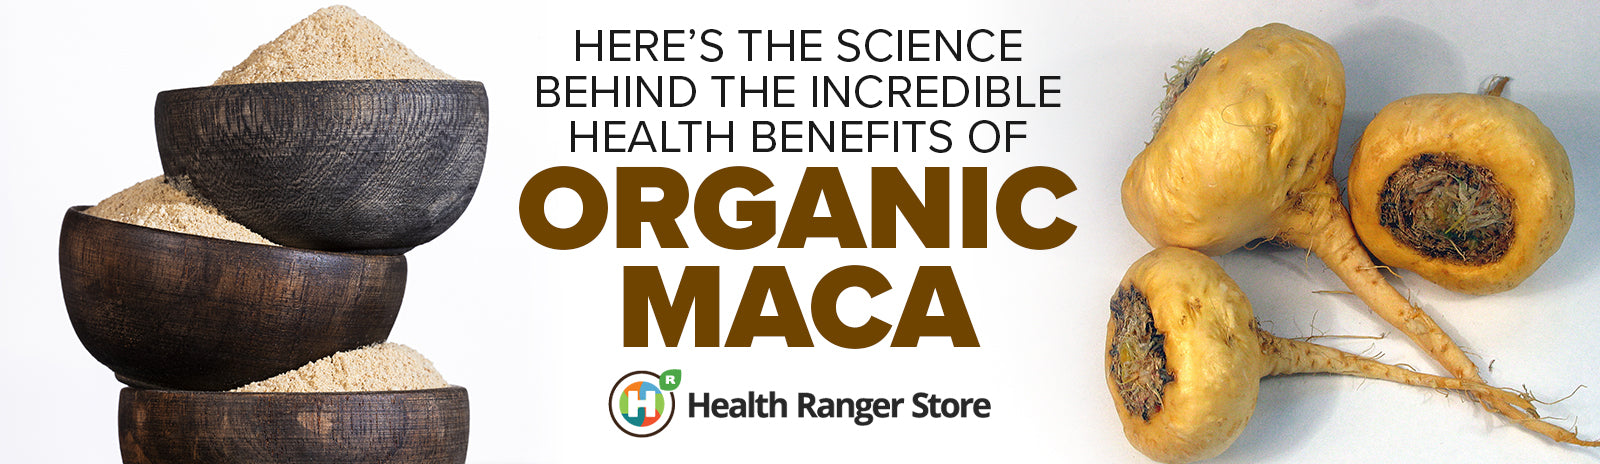 Here’s the science behind the incredible health benefits of organic maca